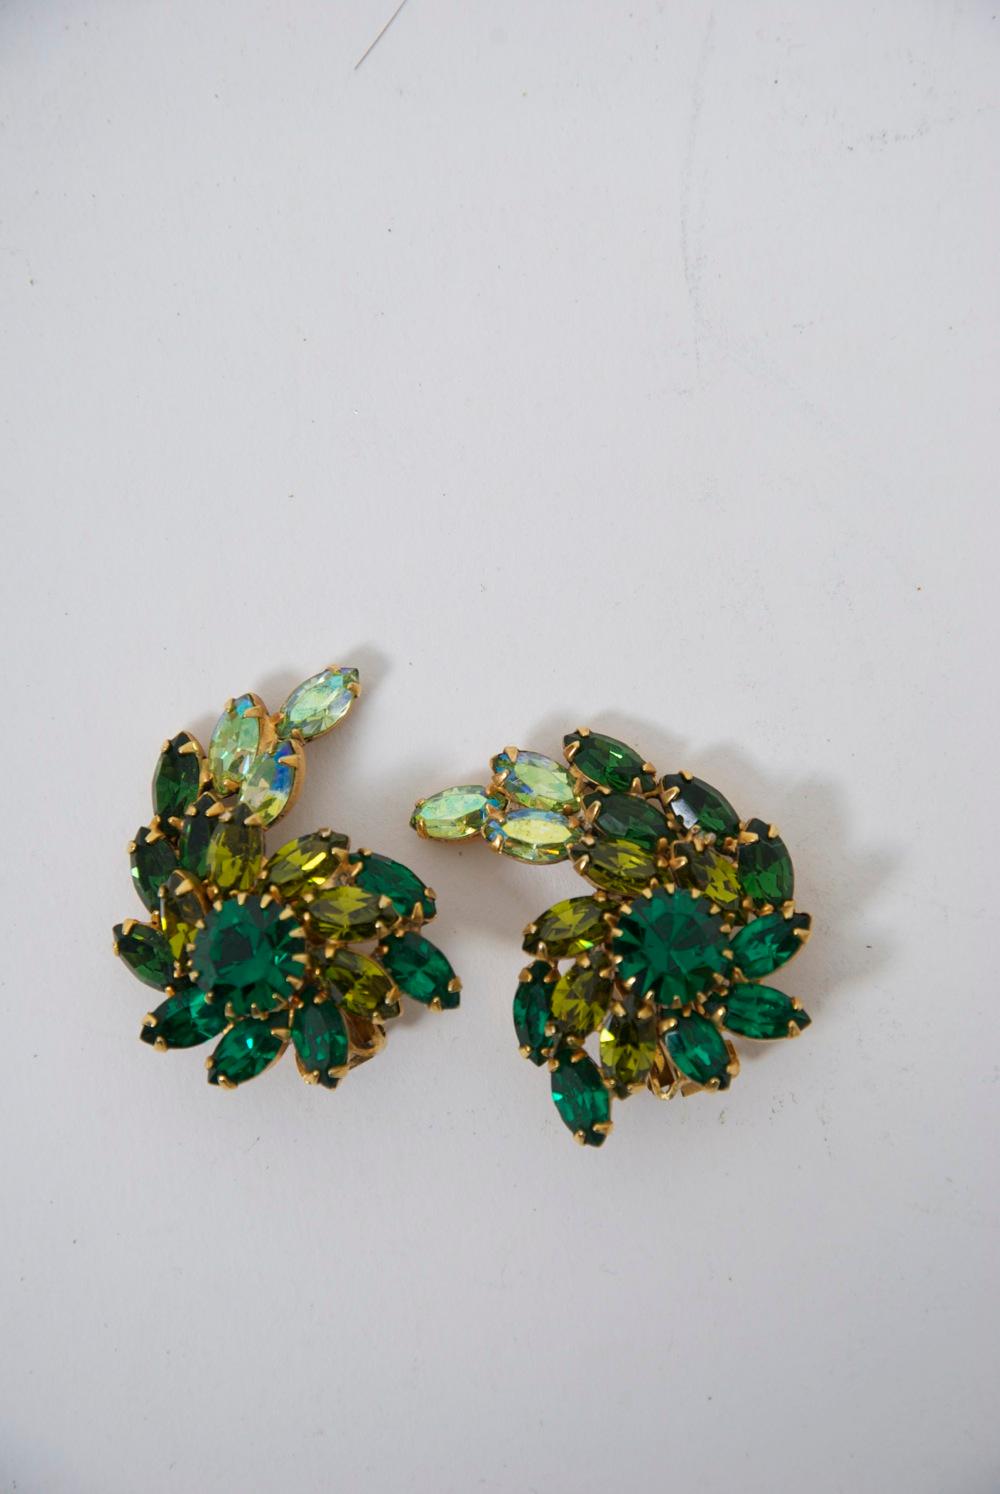 Weiss vintage clip-on earrings featuring two shades of green crystals, emerald and pale green of marquise form, their crescent shape centering a larger round emerald stone. The earrings complement the contour of the ear. Signed 